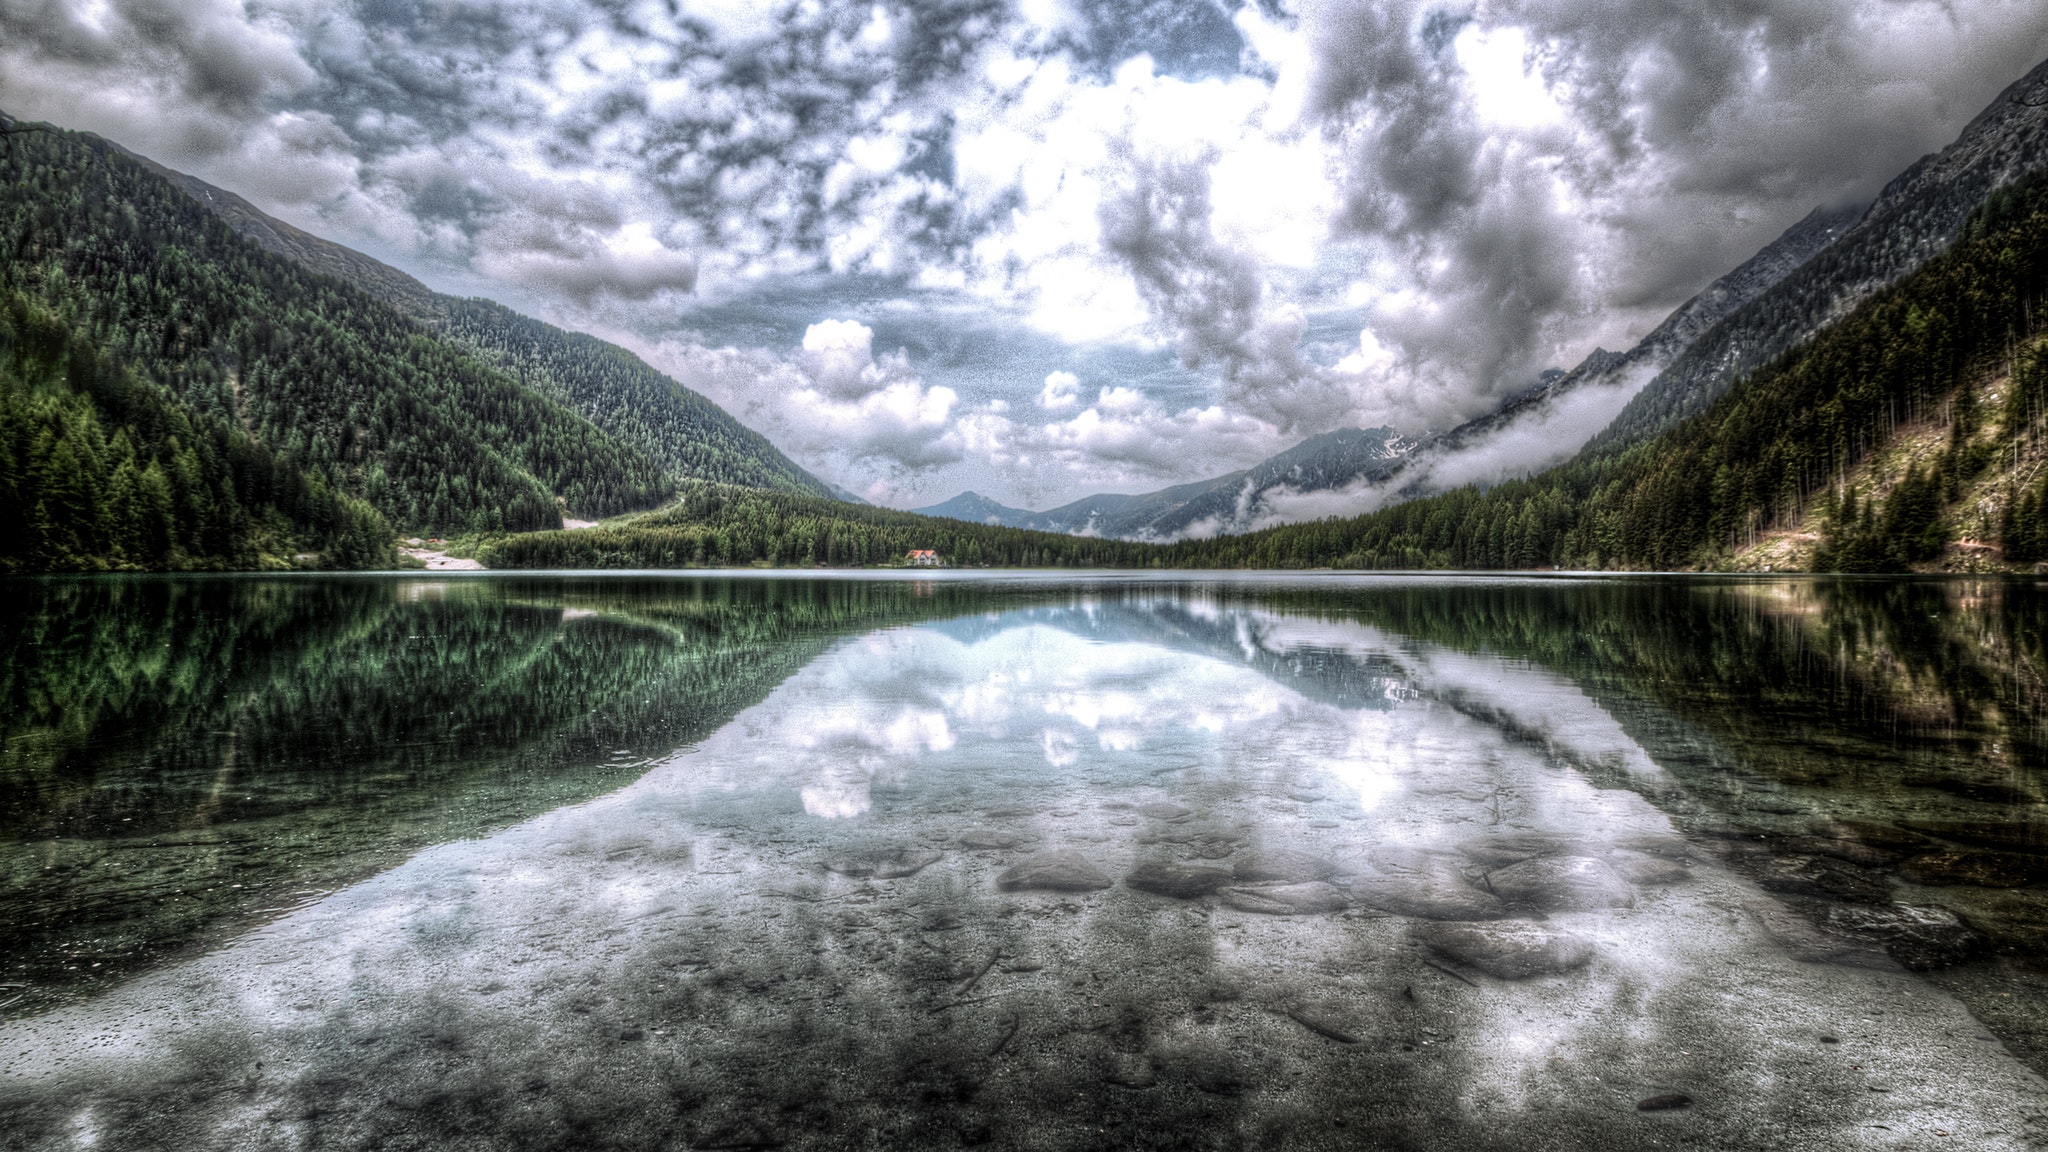 General 2048x1152 calm clouds mist forest overcast lake mountains landscape nature outdoors panorama reflection wood water